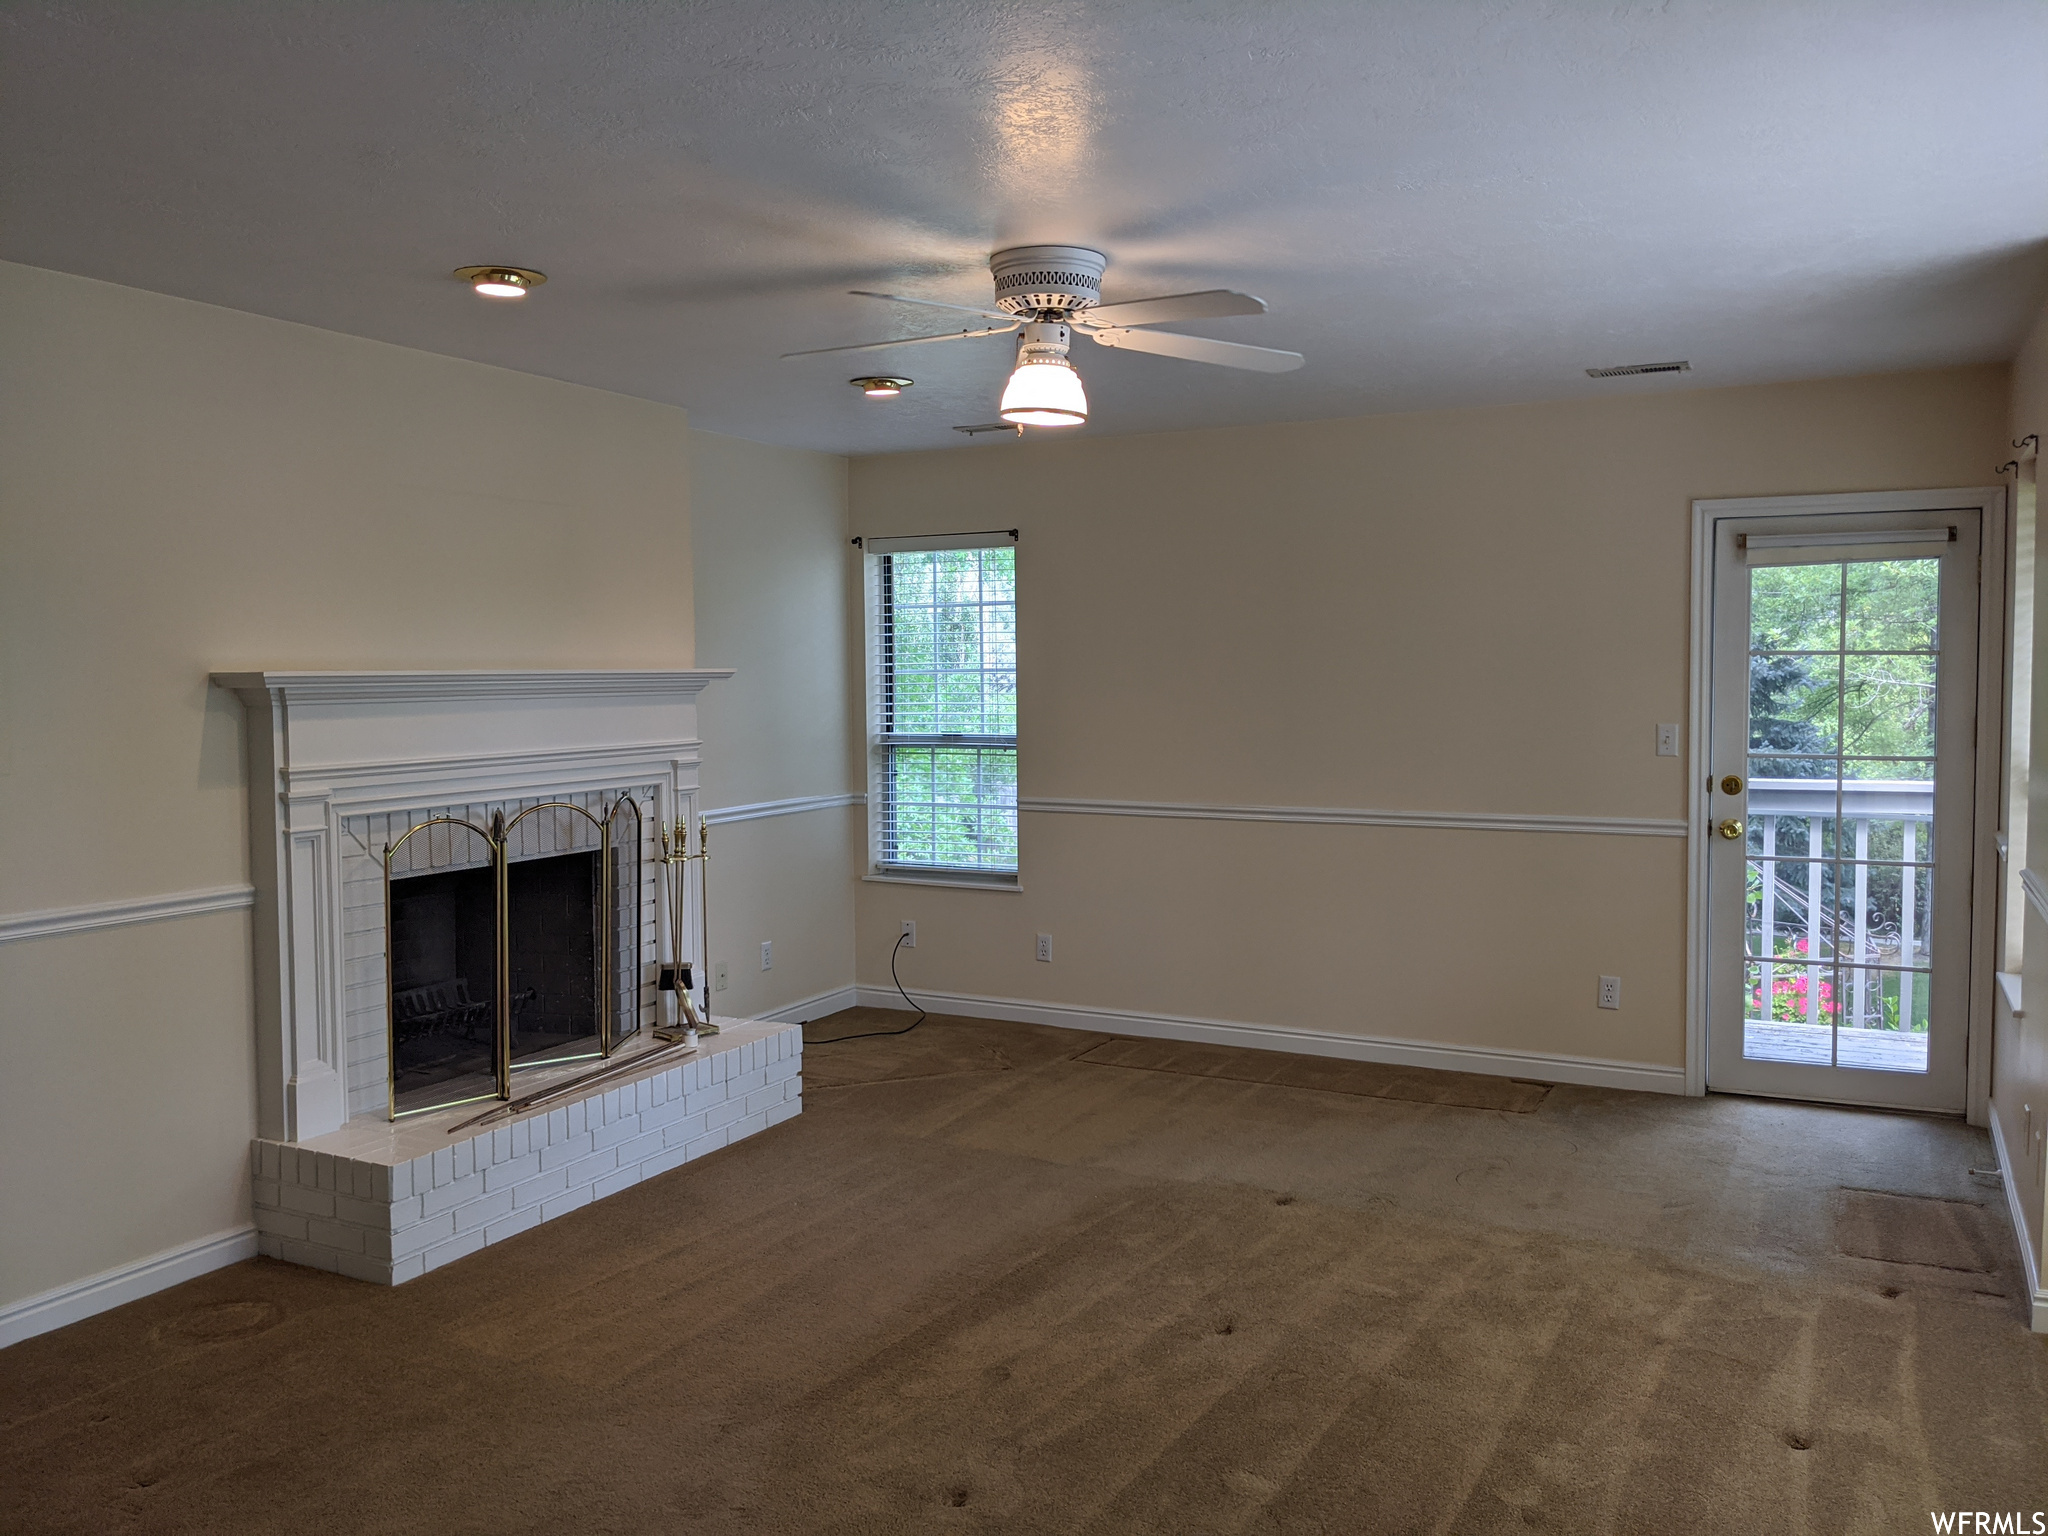 Living room with ceiling fan, dark carpet, a healthy amount of sunlight, and a fireplace